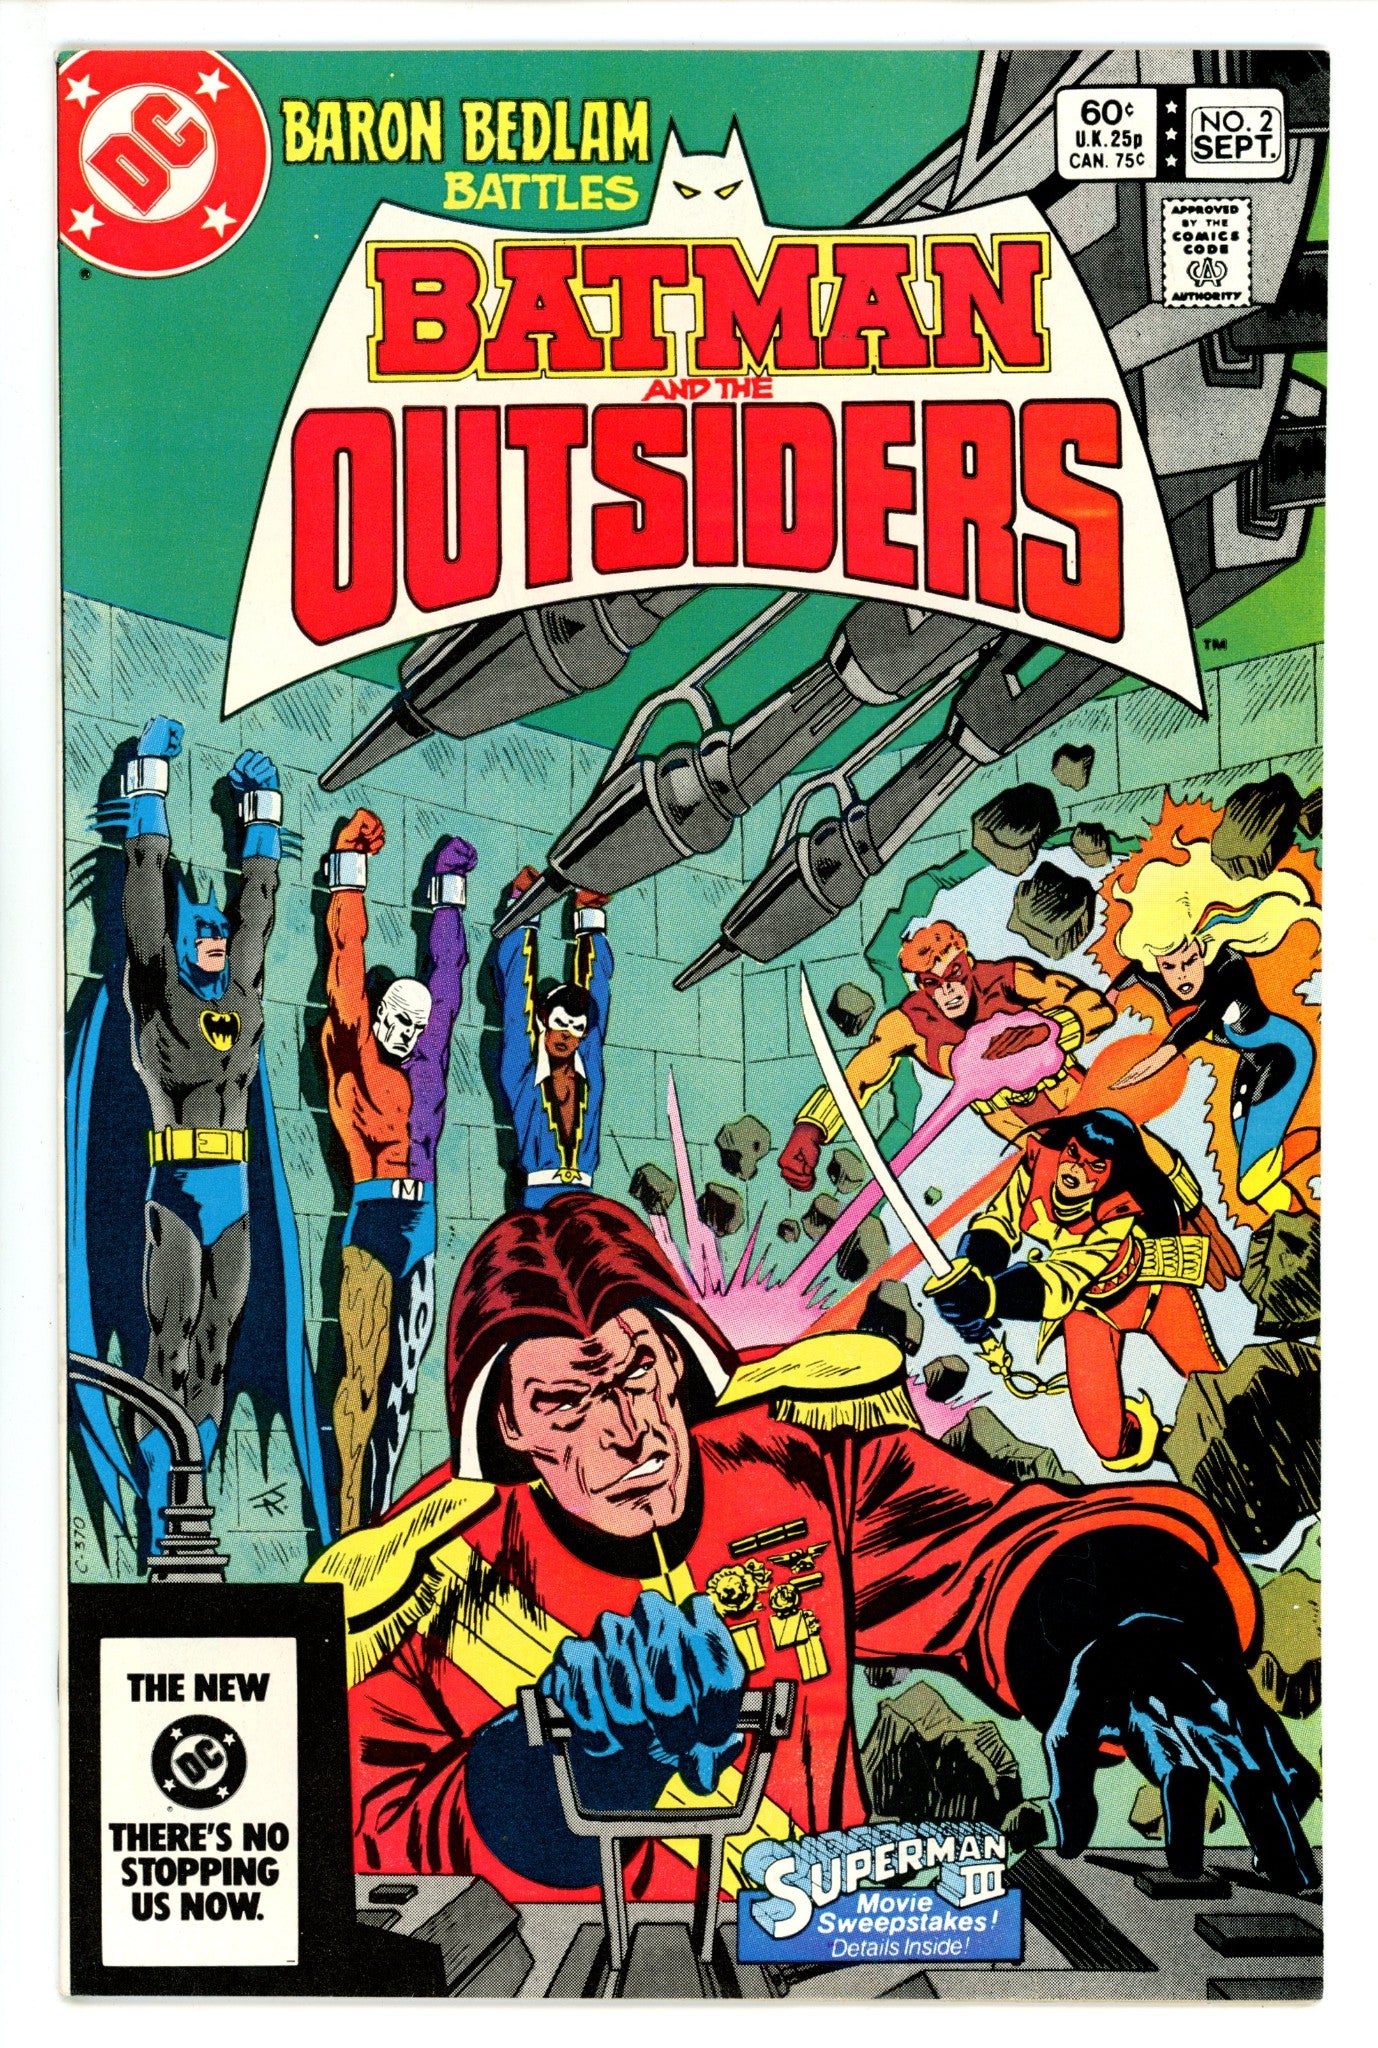 Batman and the Outsiders Vol 1 2 (1983)